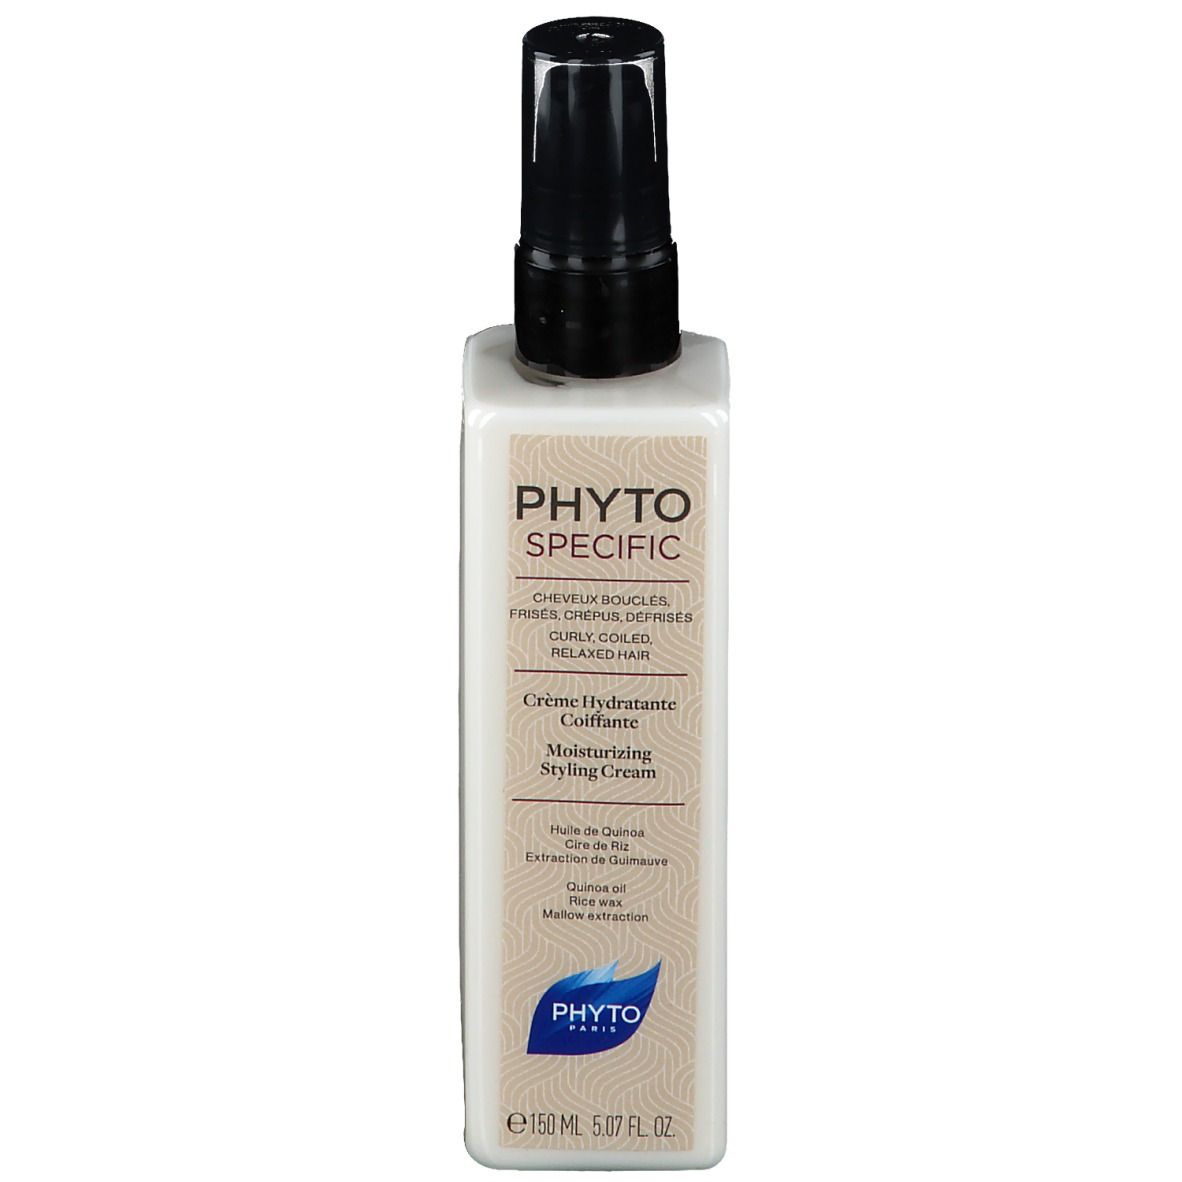 Phyto Phyto Specific Hydraterende Stylingcrème